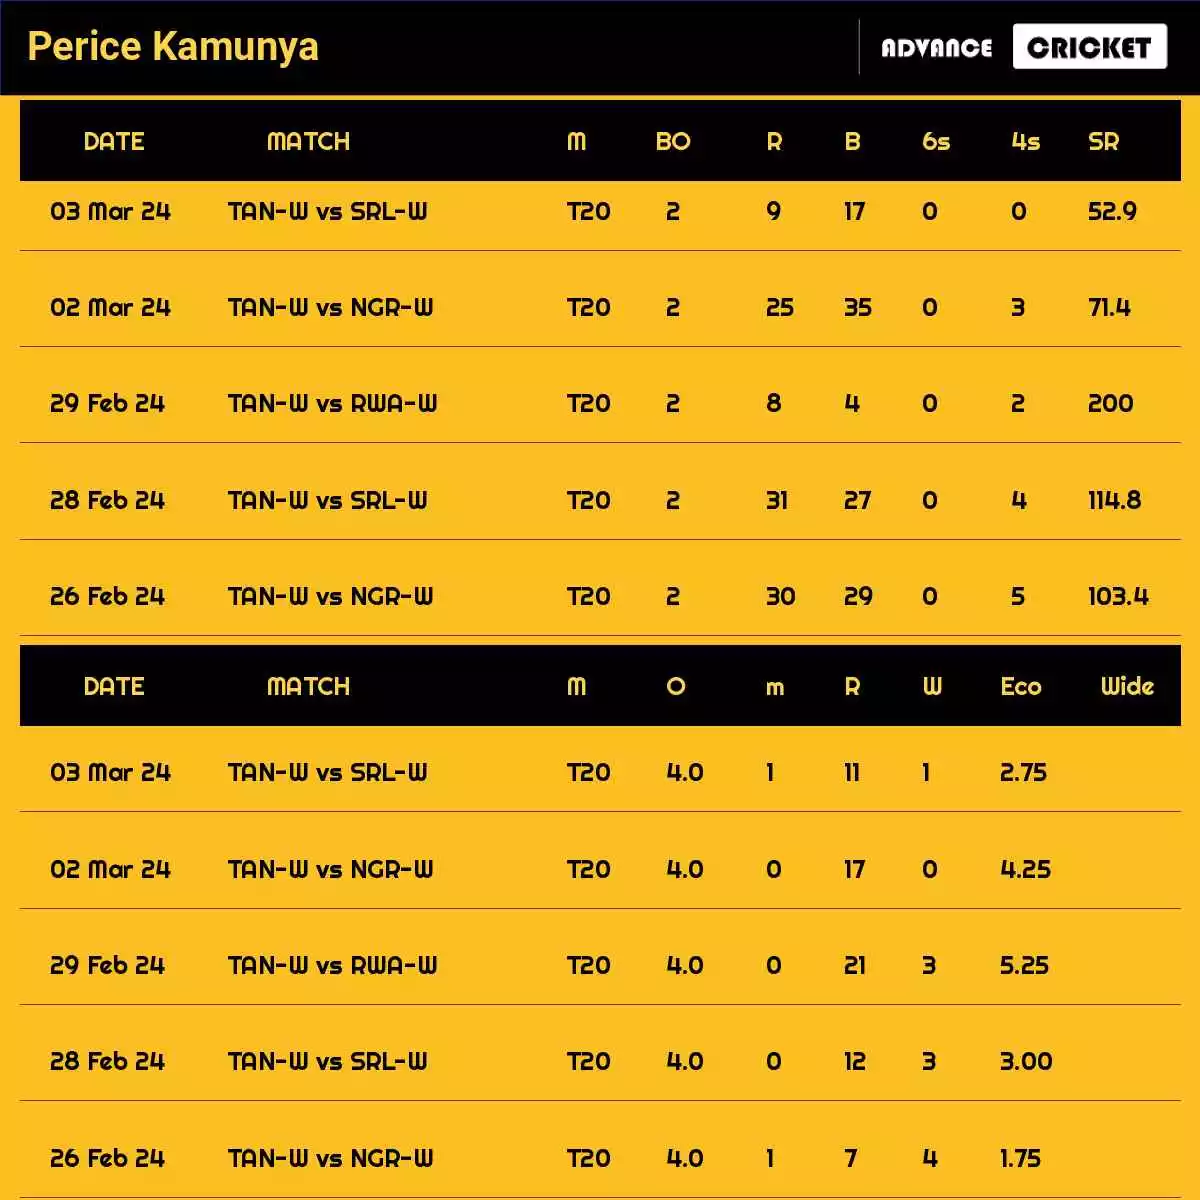 Perice Kamunya Recent Matches Details Date Wise